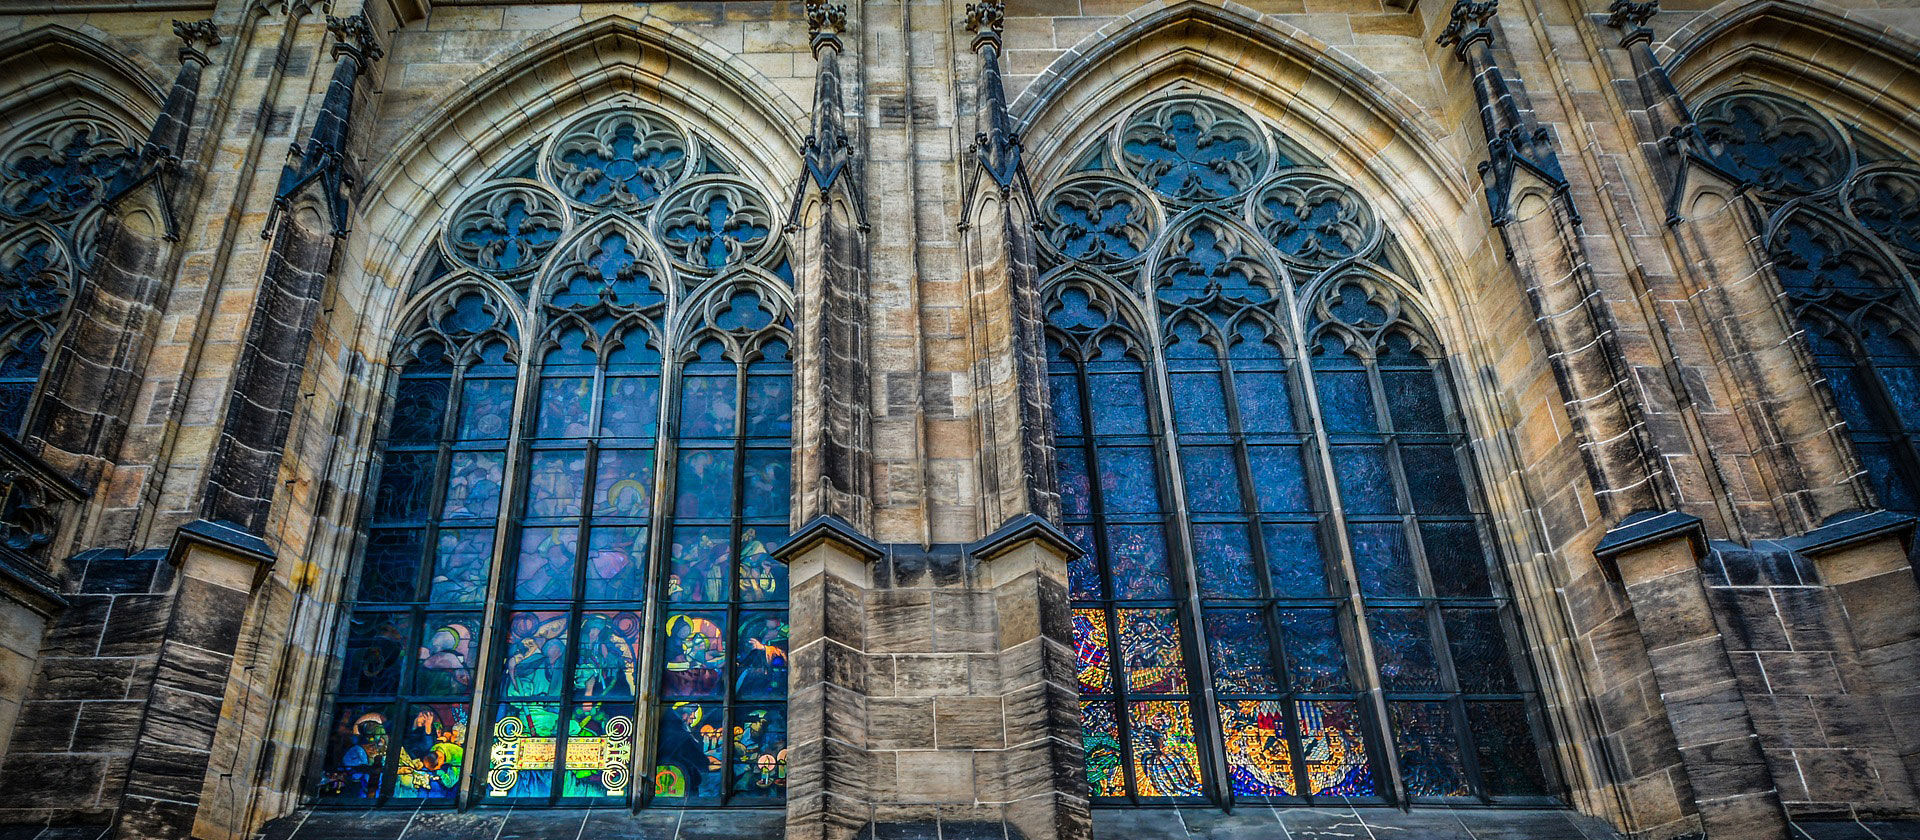 Stained glass windows from exterior of church